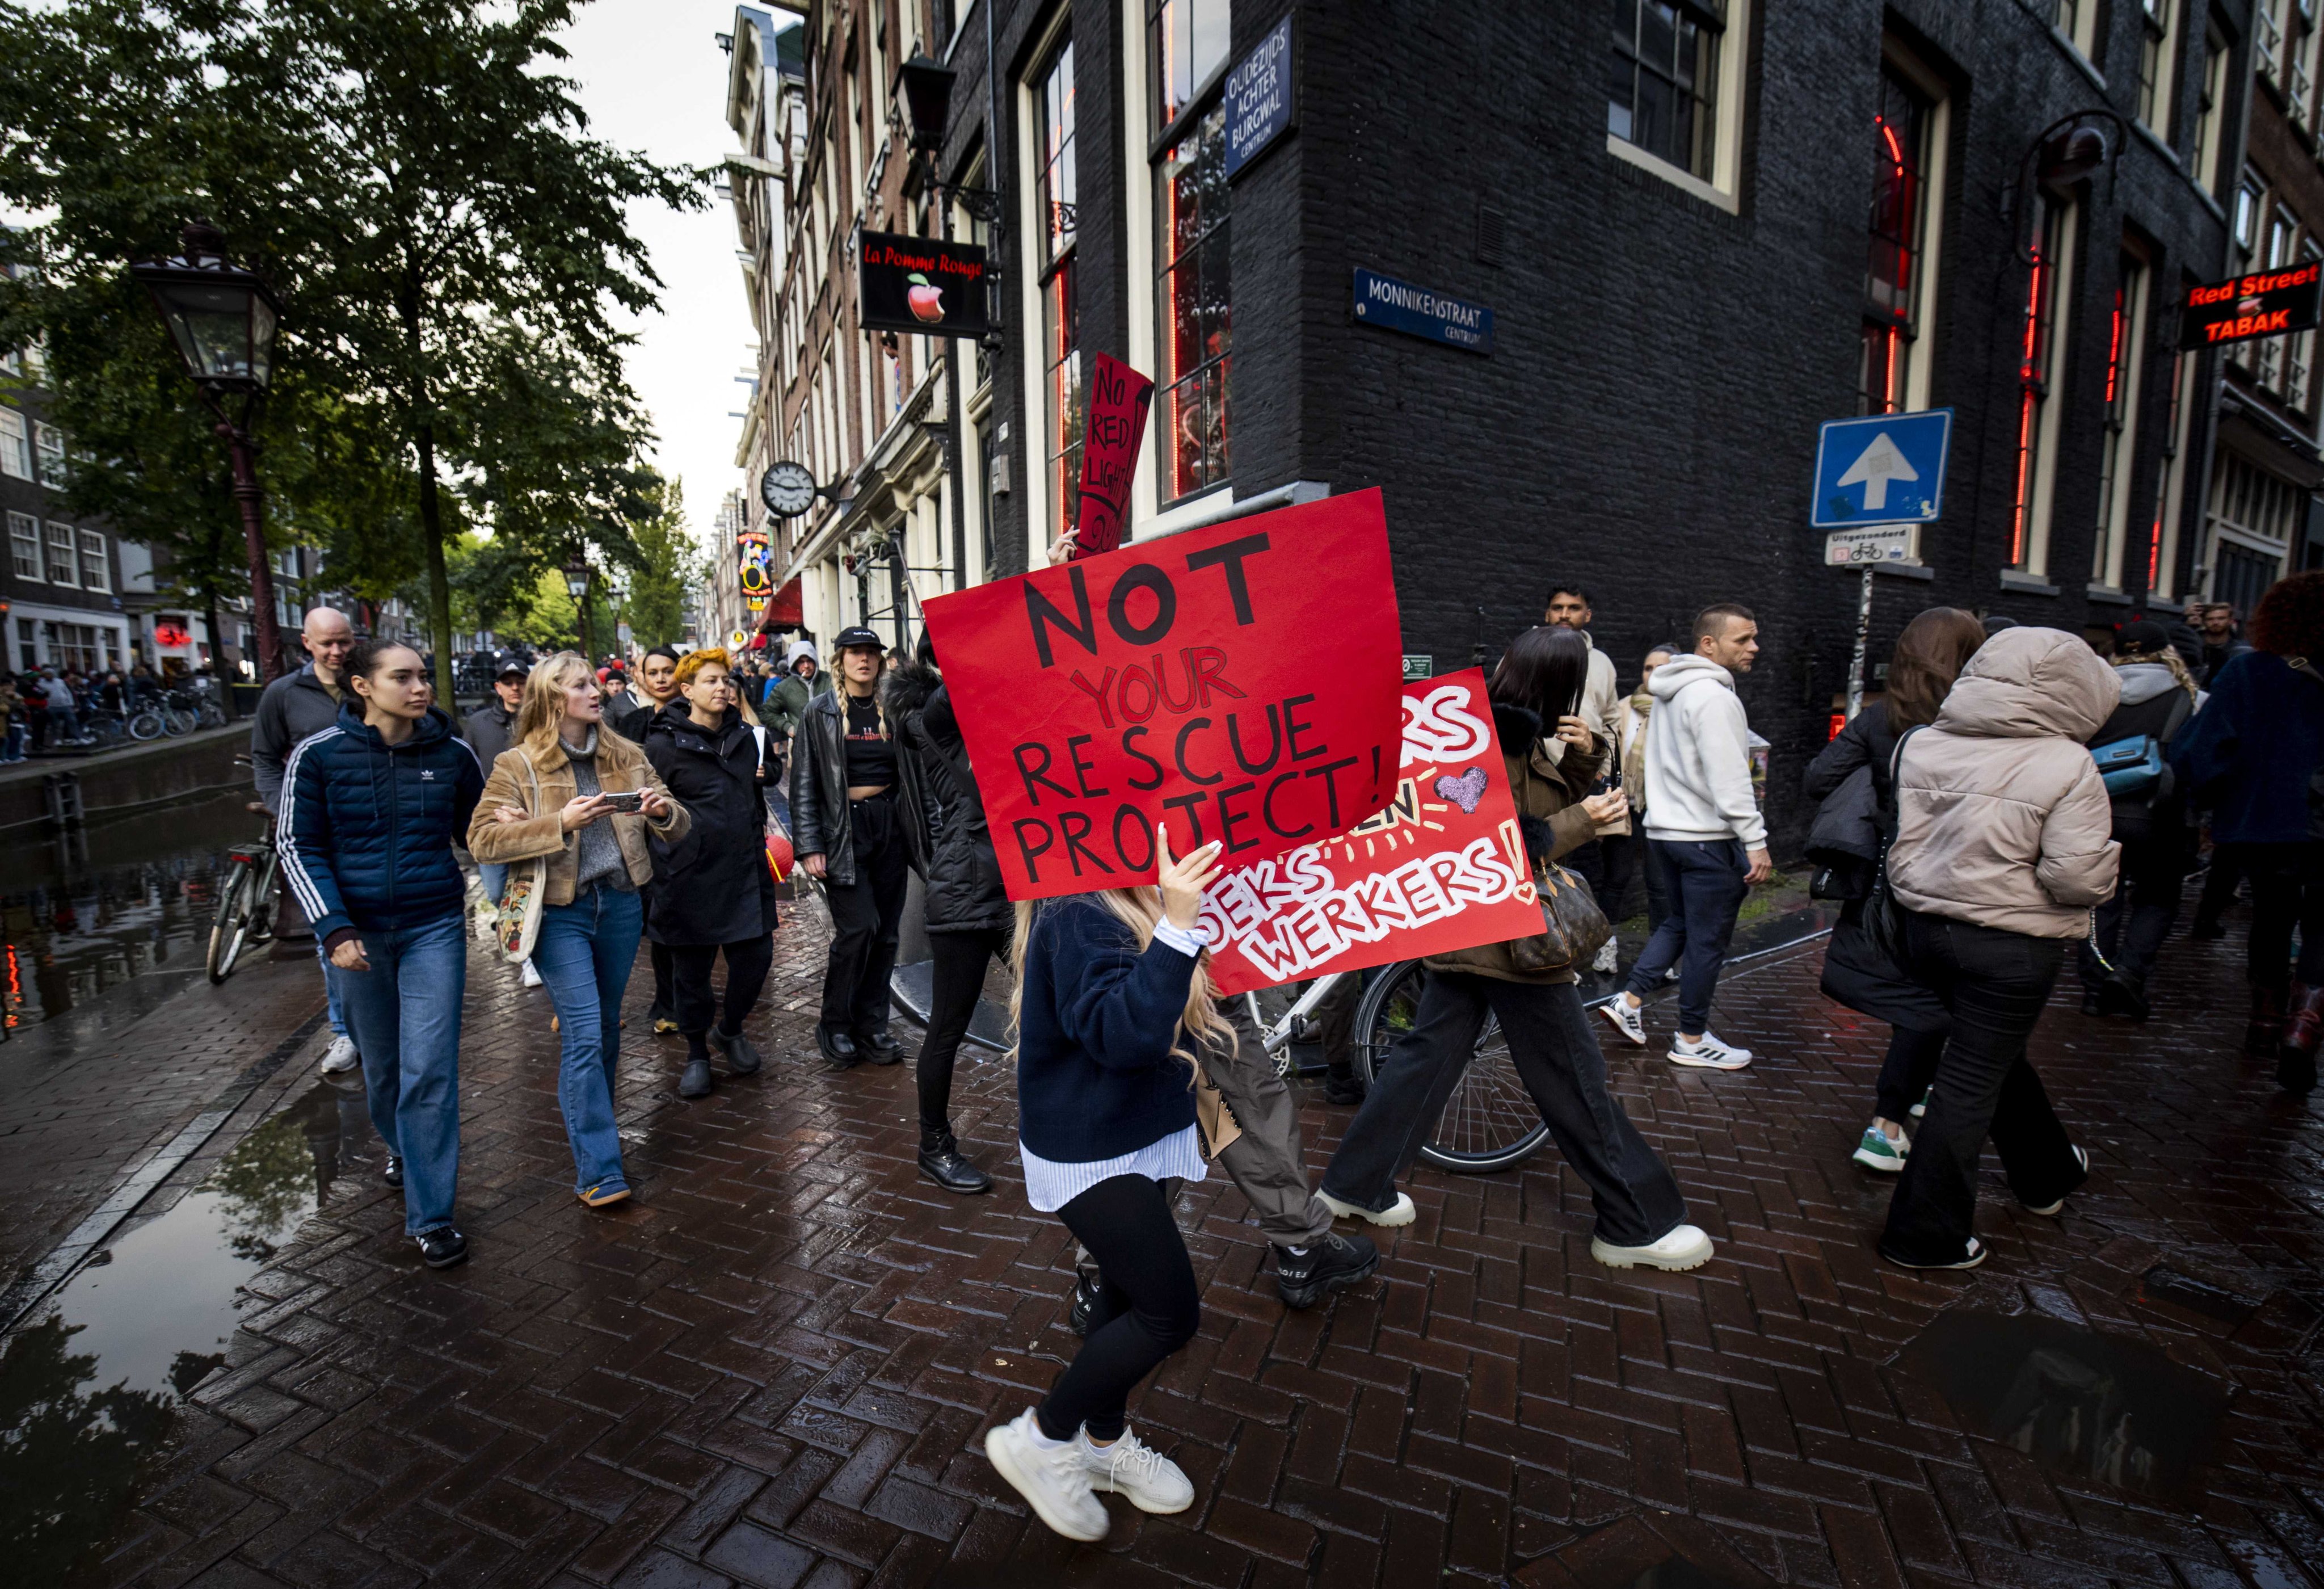 Demonstrators hold placards during a parade through Amsterdam on Thursday. Photo: EPA-EFE